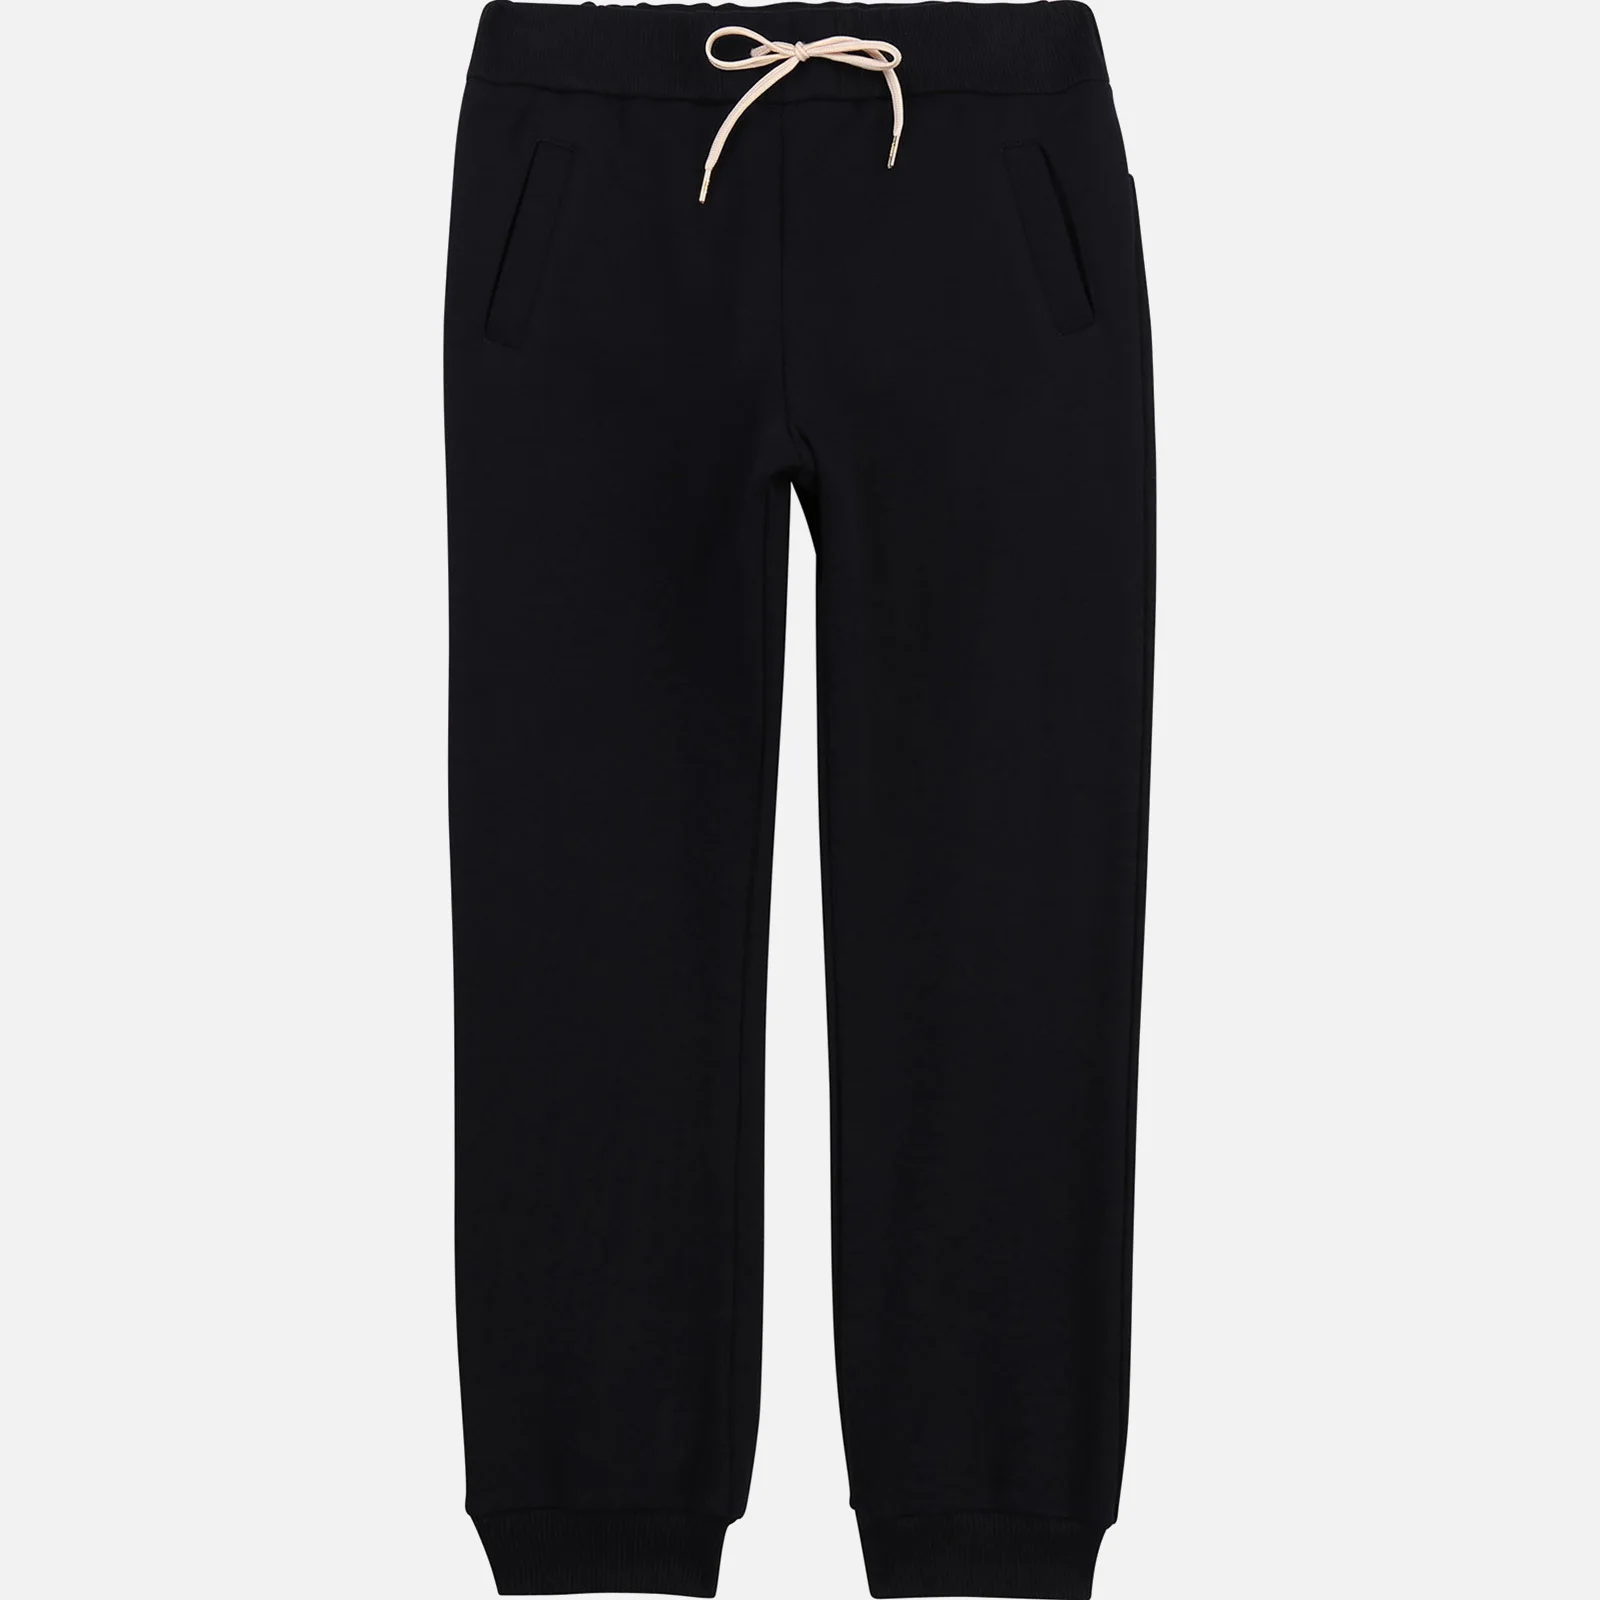 Chloé Girls' Sweatpant Trousers - Navy Image 1